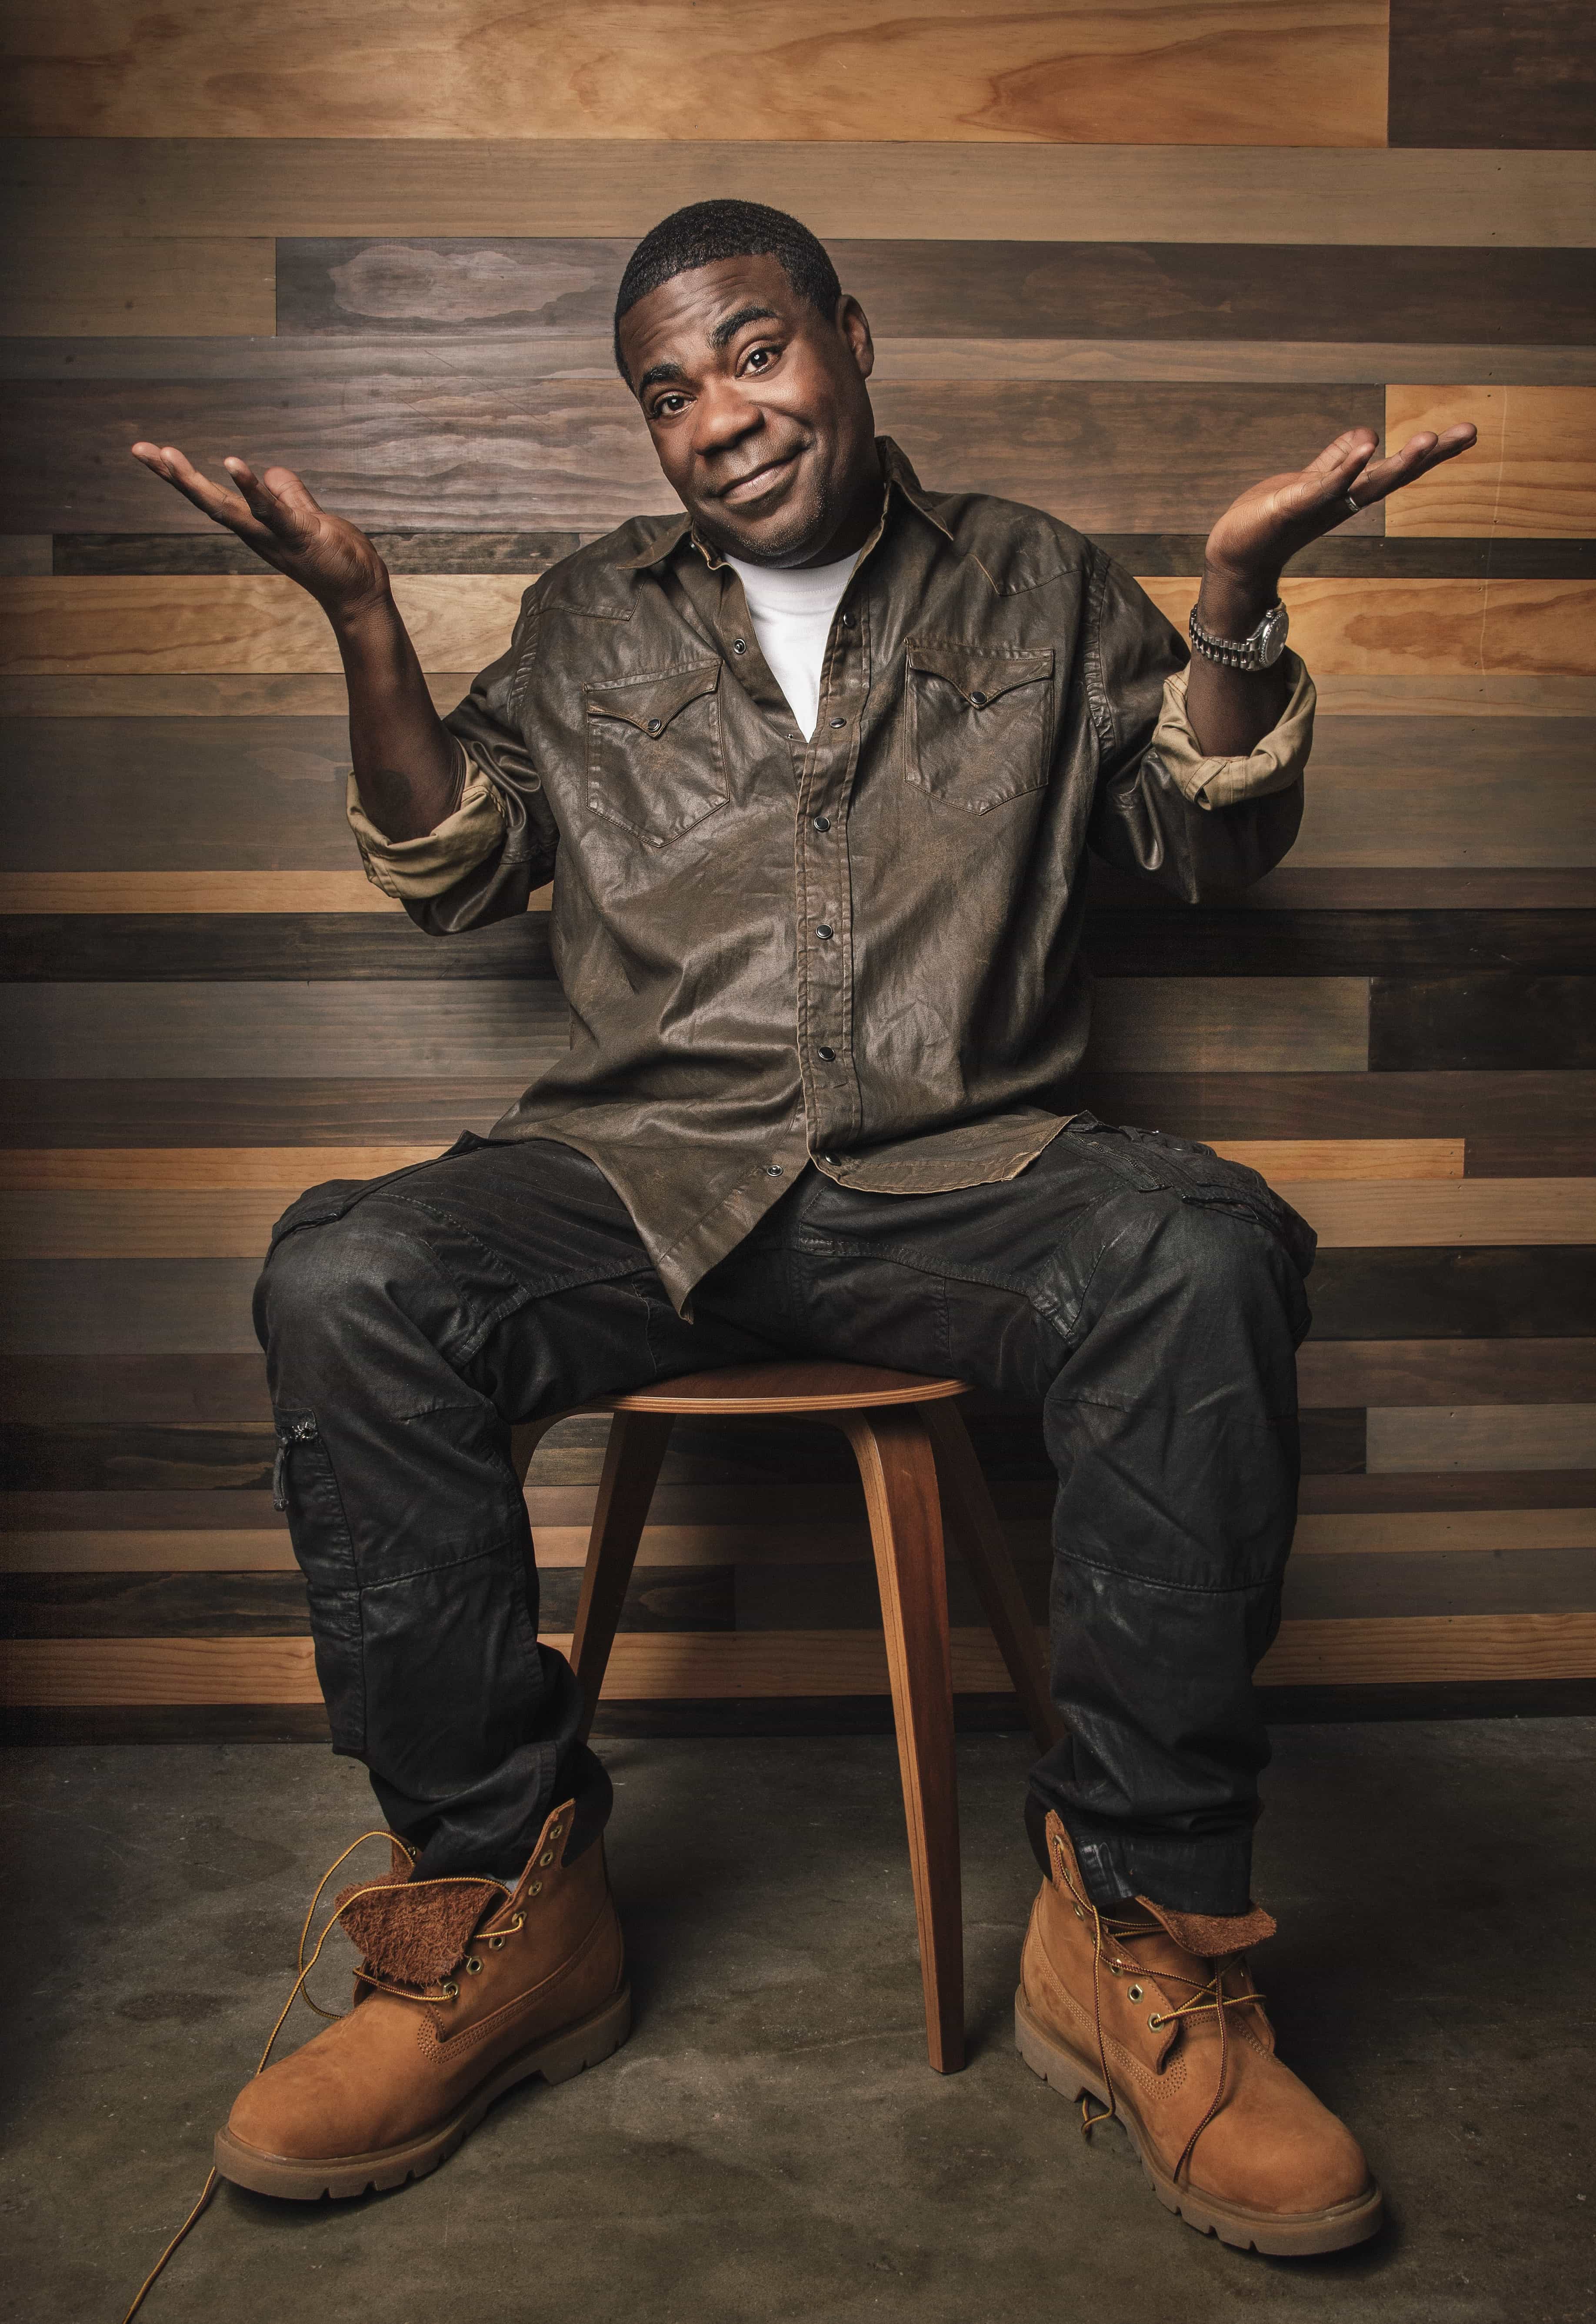 Tracy Morgan. Photo by Paul Mobley.